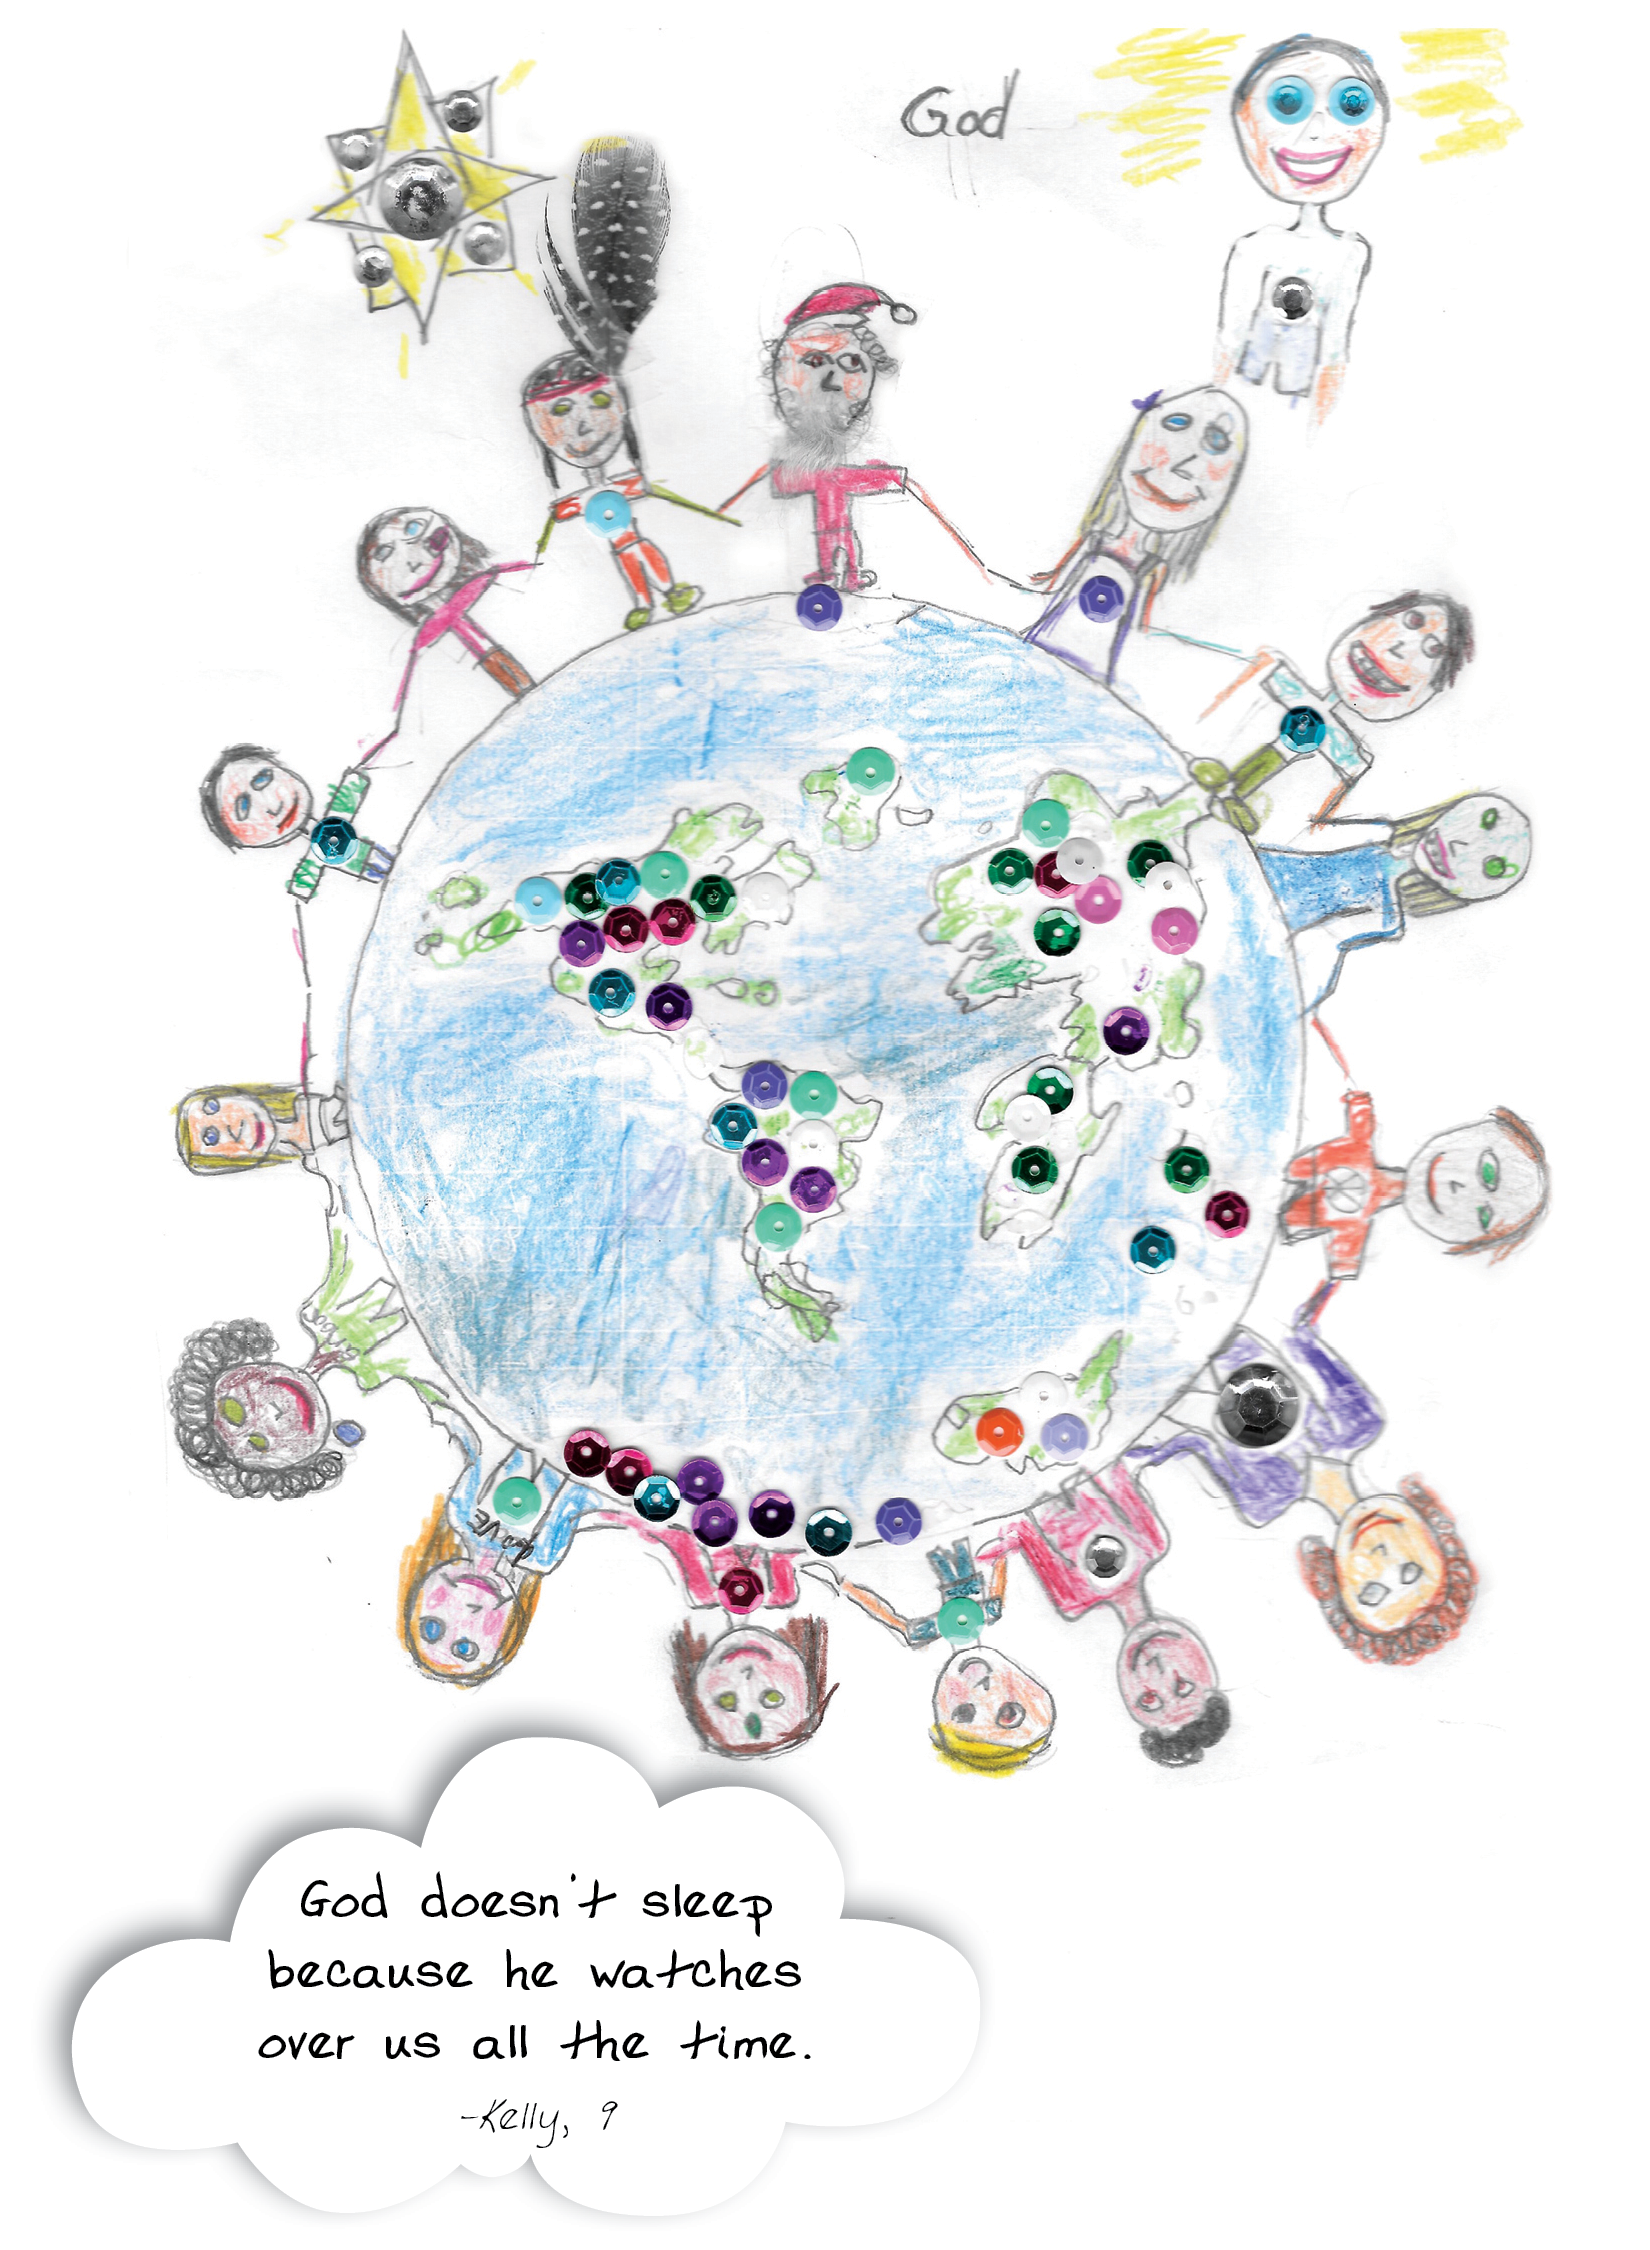 God doesn't get any sleep in this drawing from the new book, OMG! How Children See God.